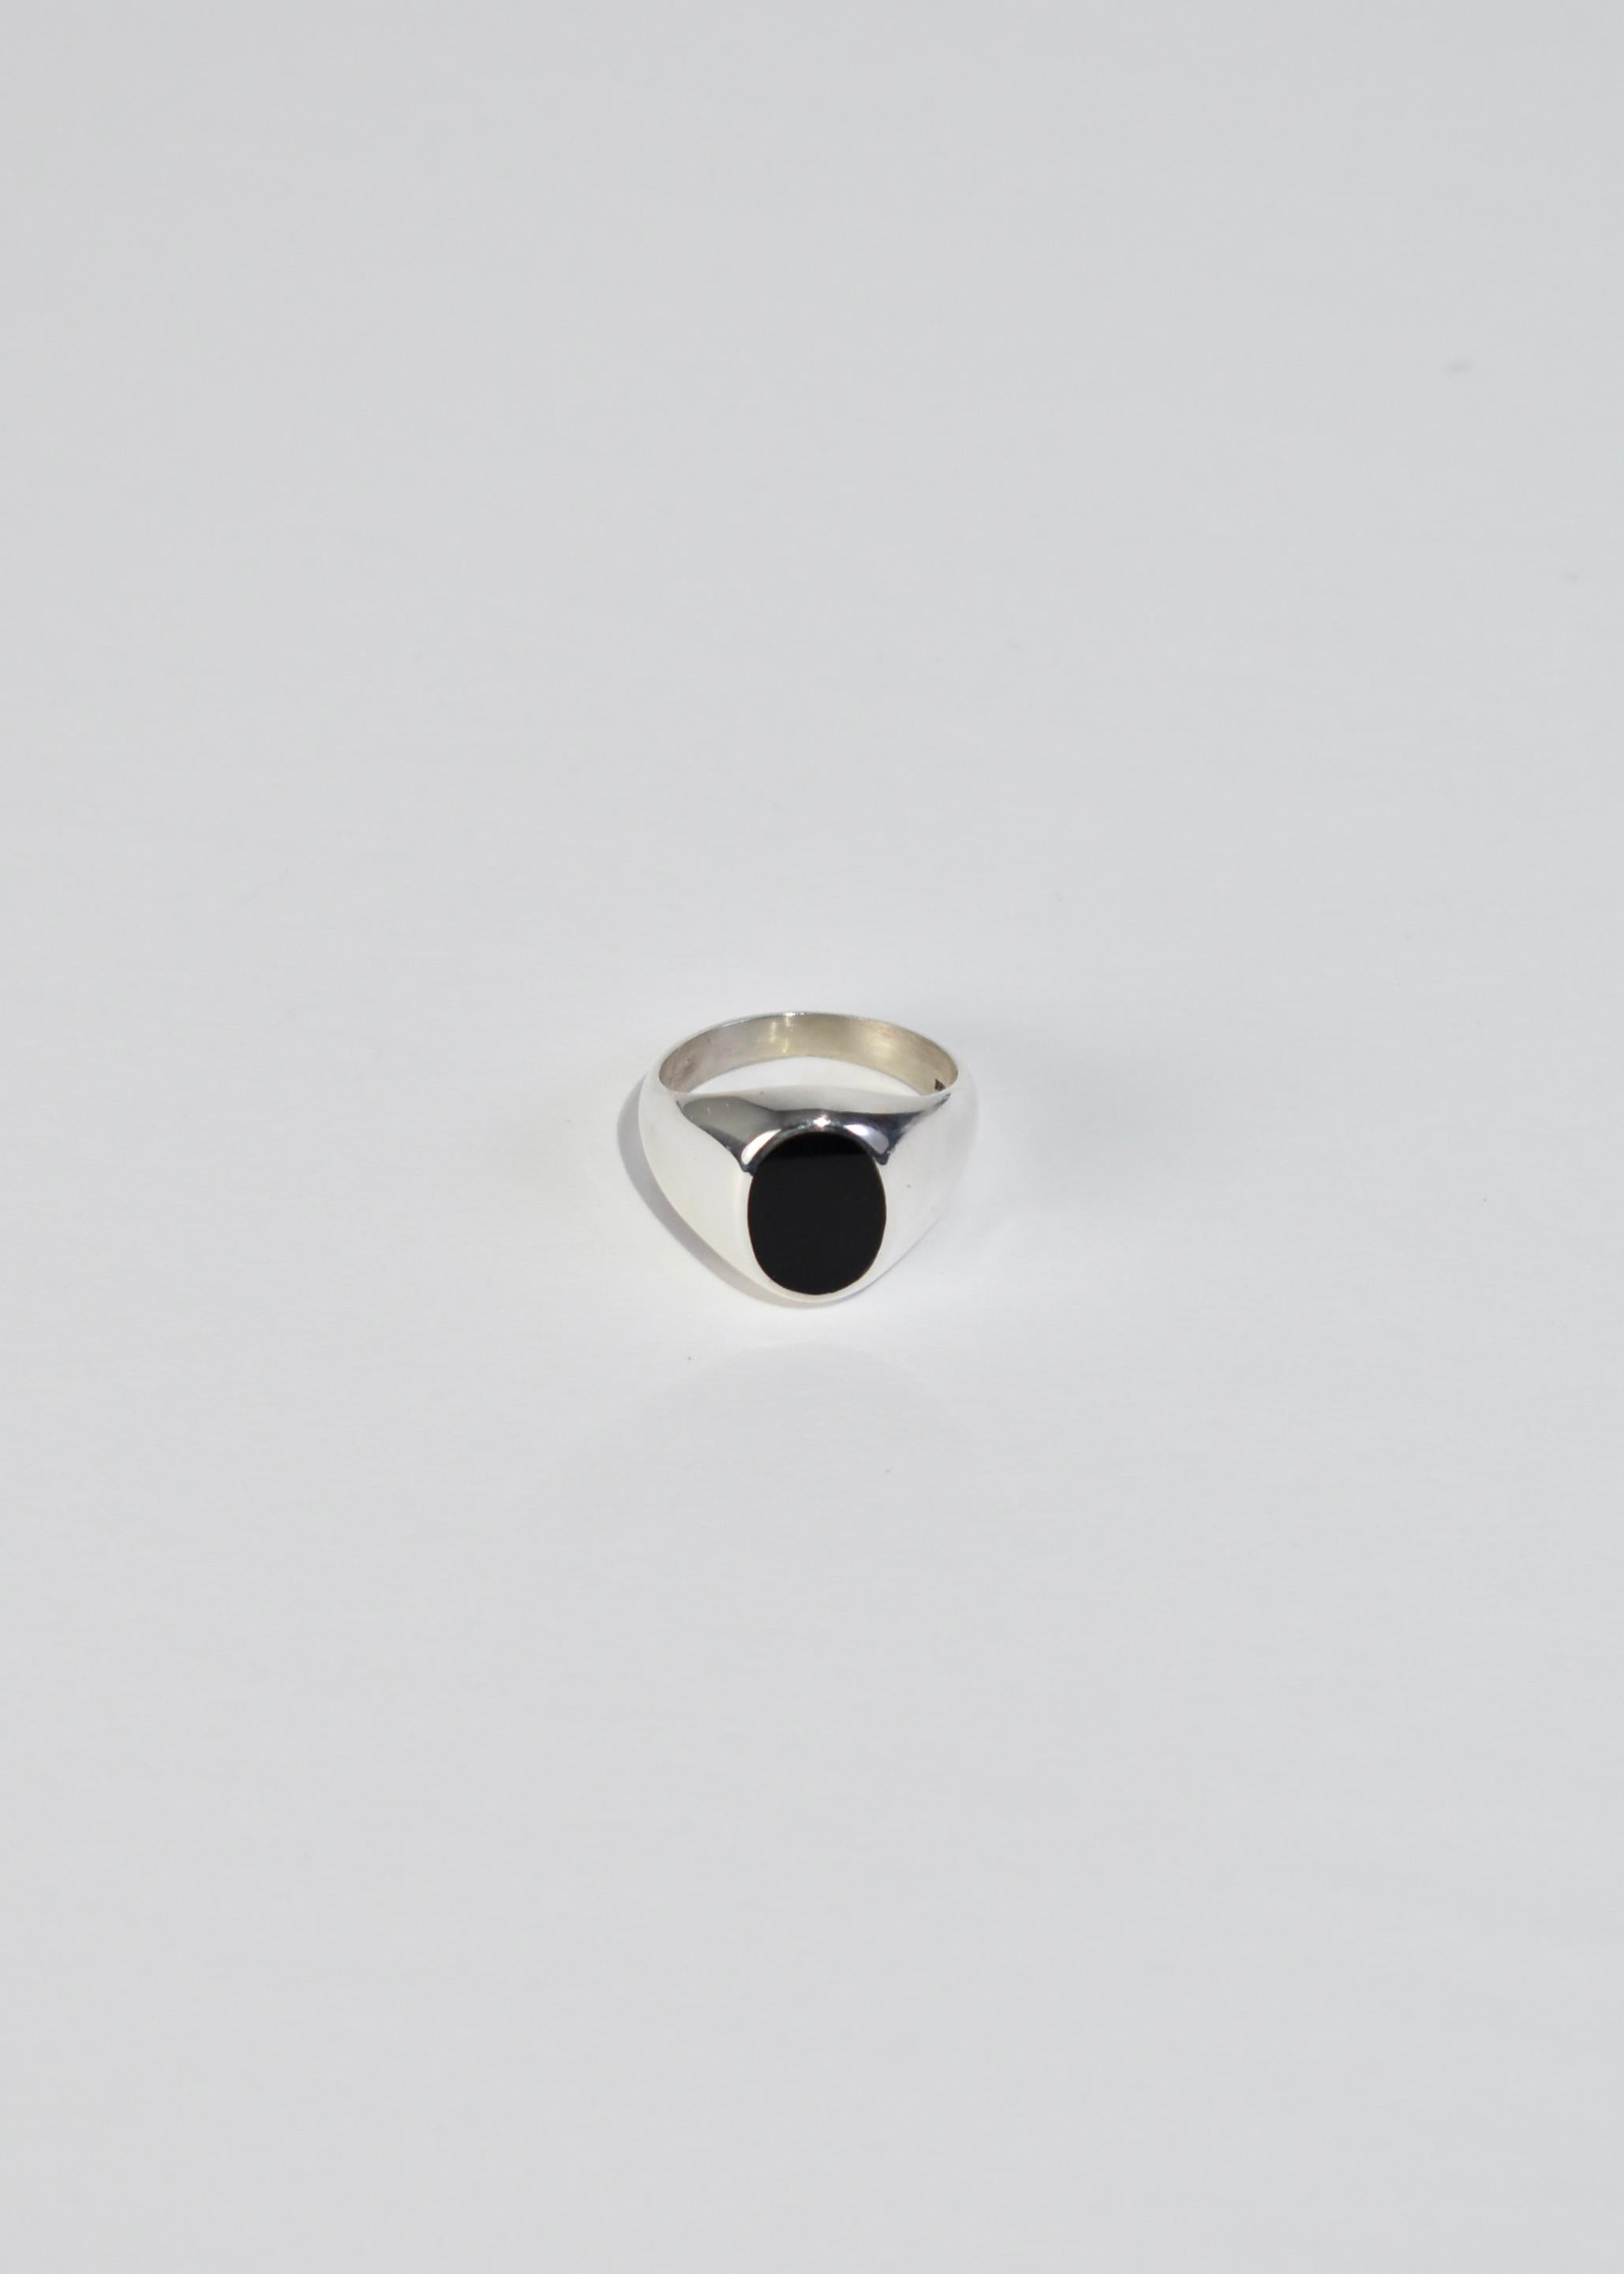 Beautiful vintage silver ring with polished oval onyx detail. Stamped 925.